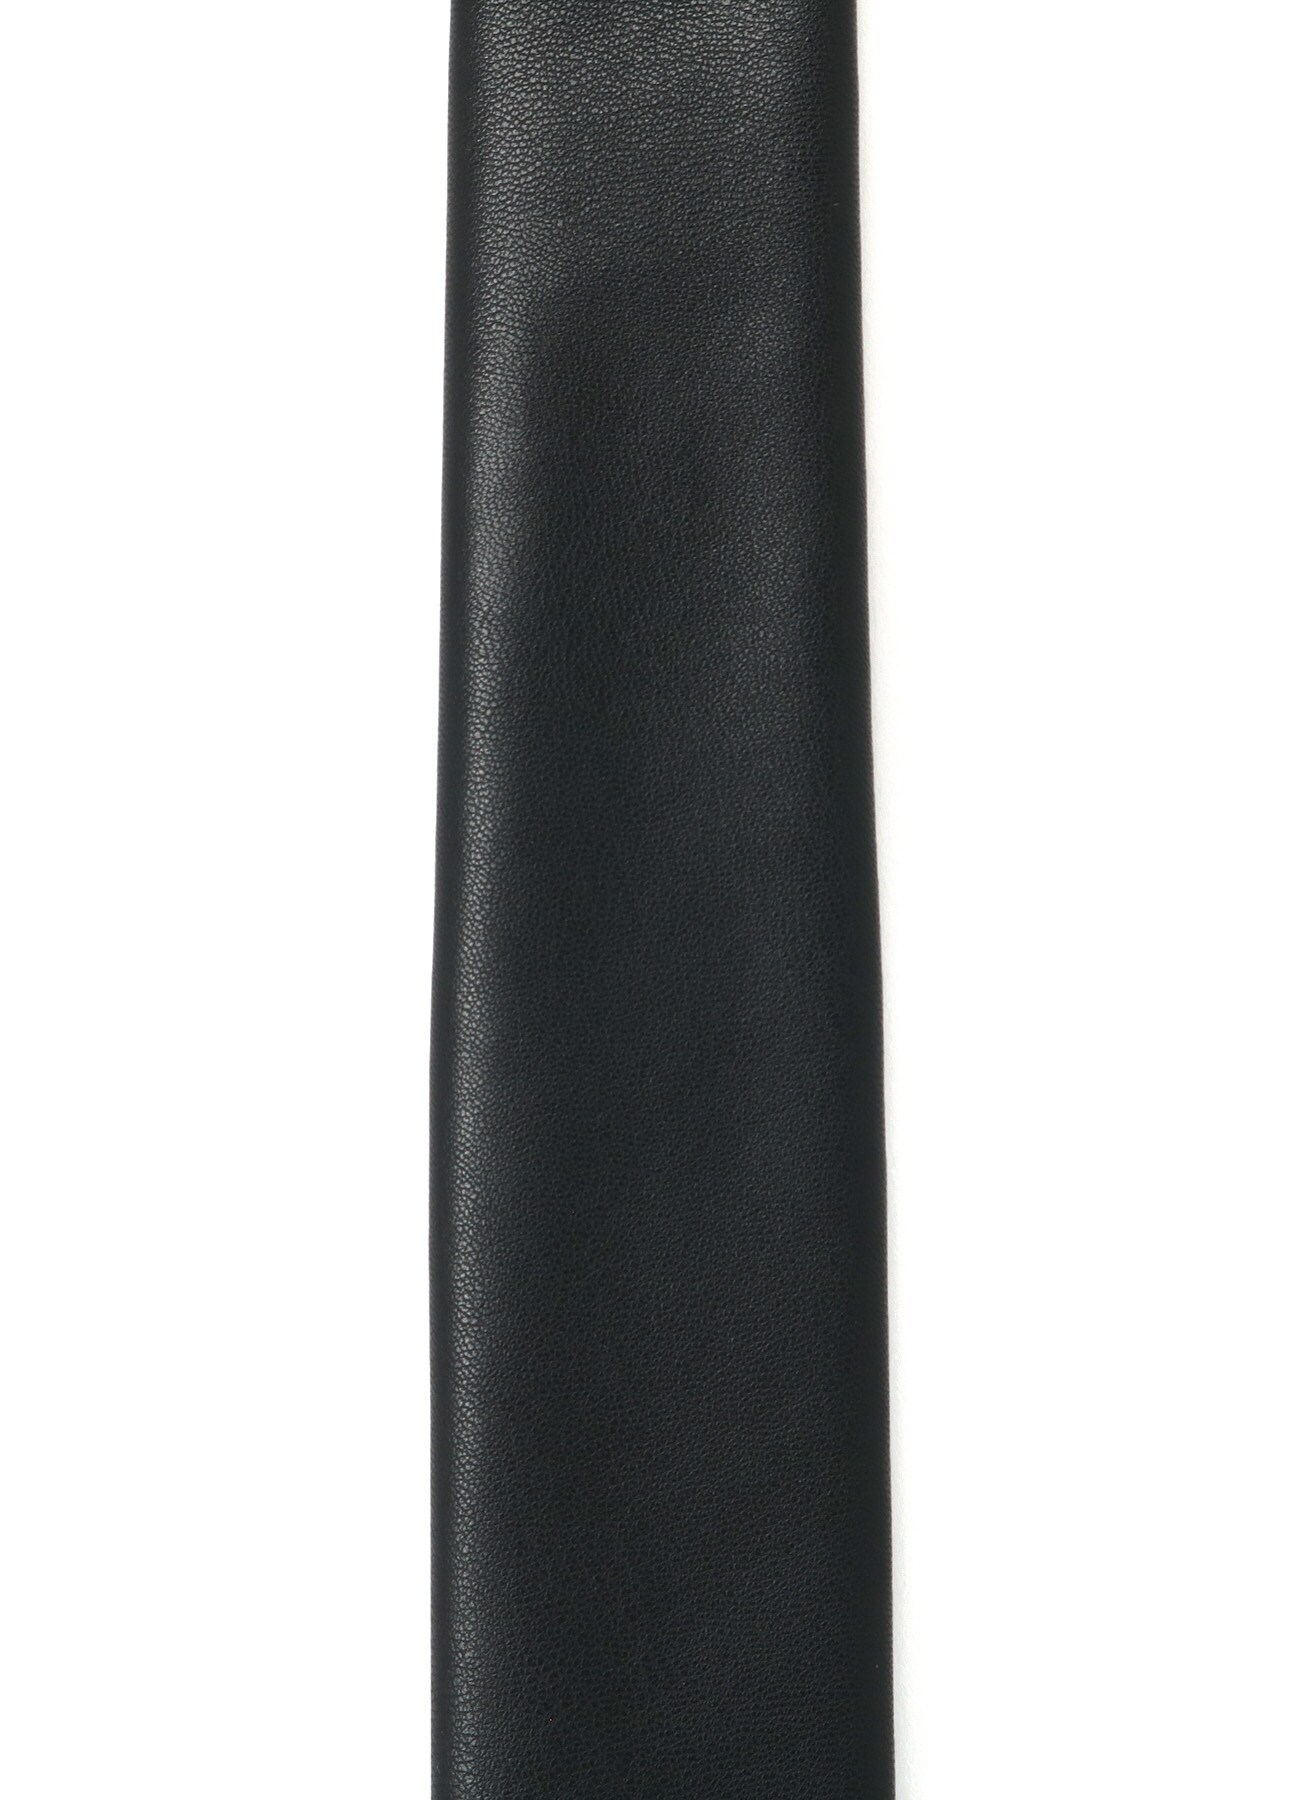 Synthetic leather Narrow Square Tie